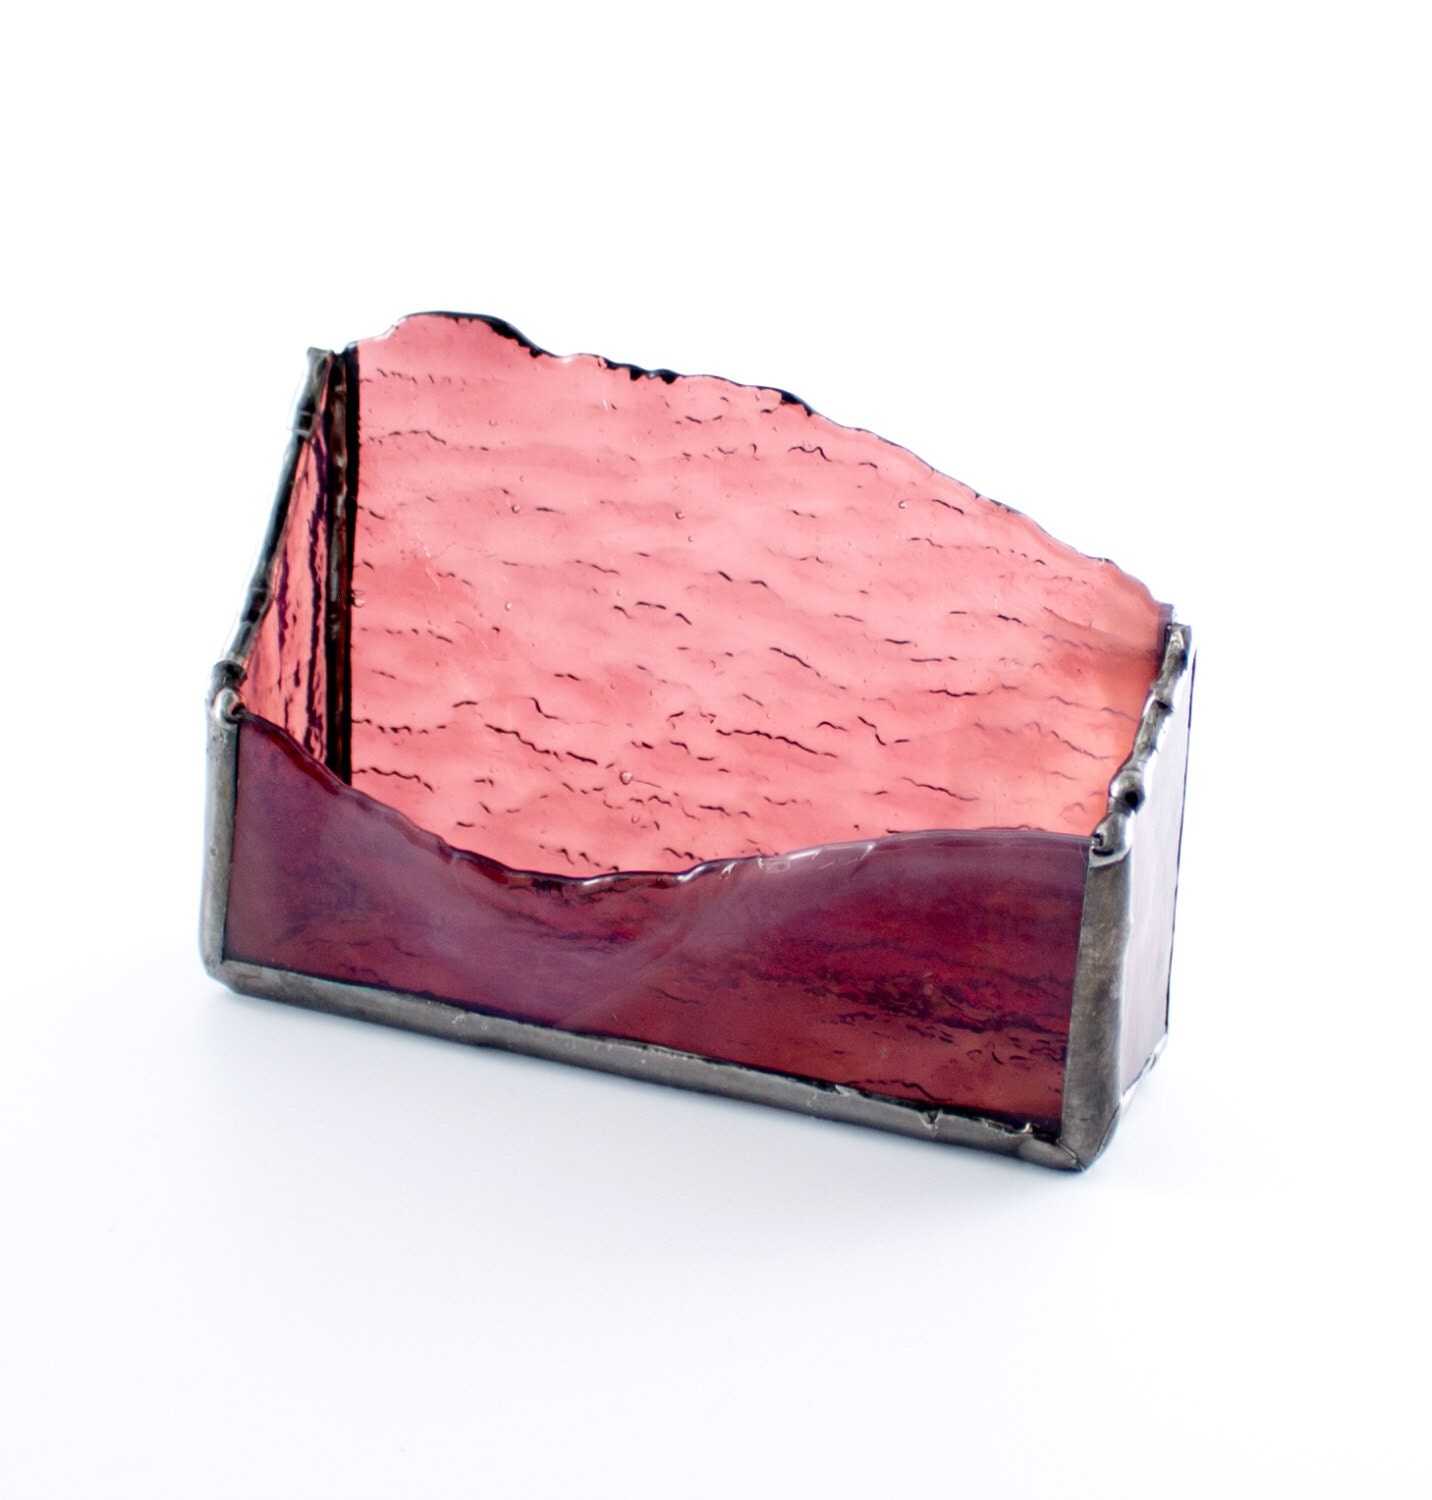 Stained Glass Business Card Holder Desk Accessory